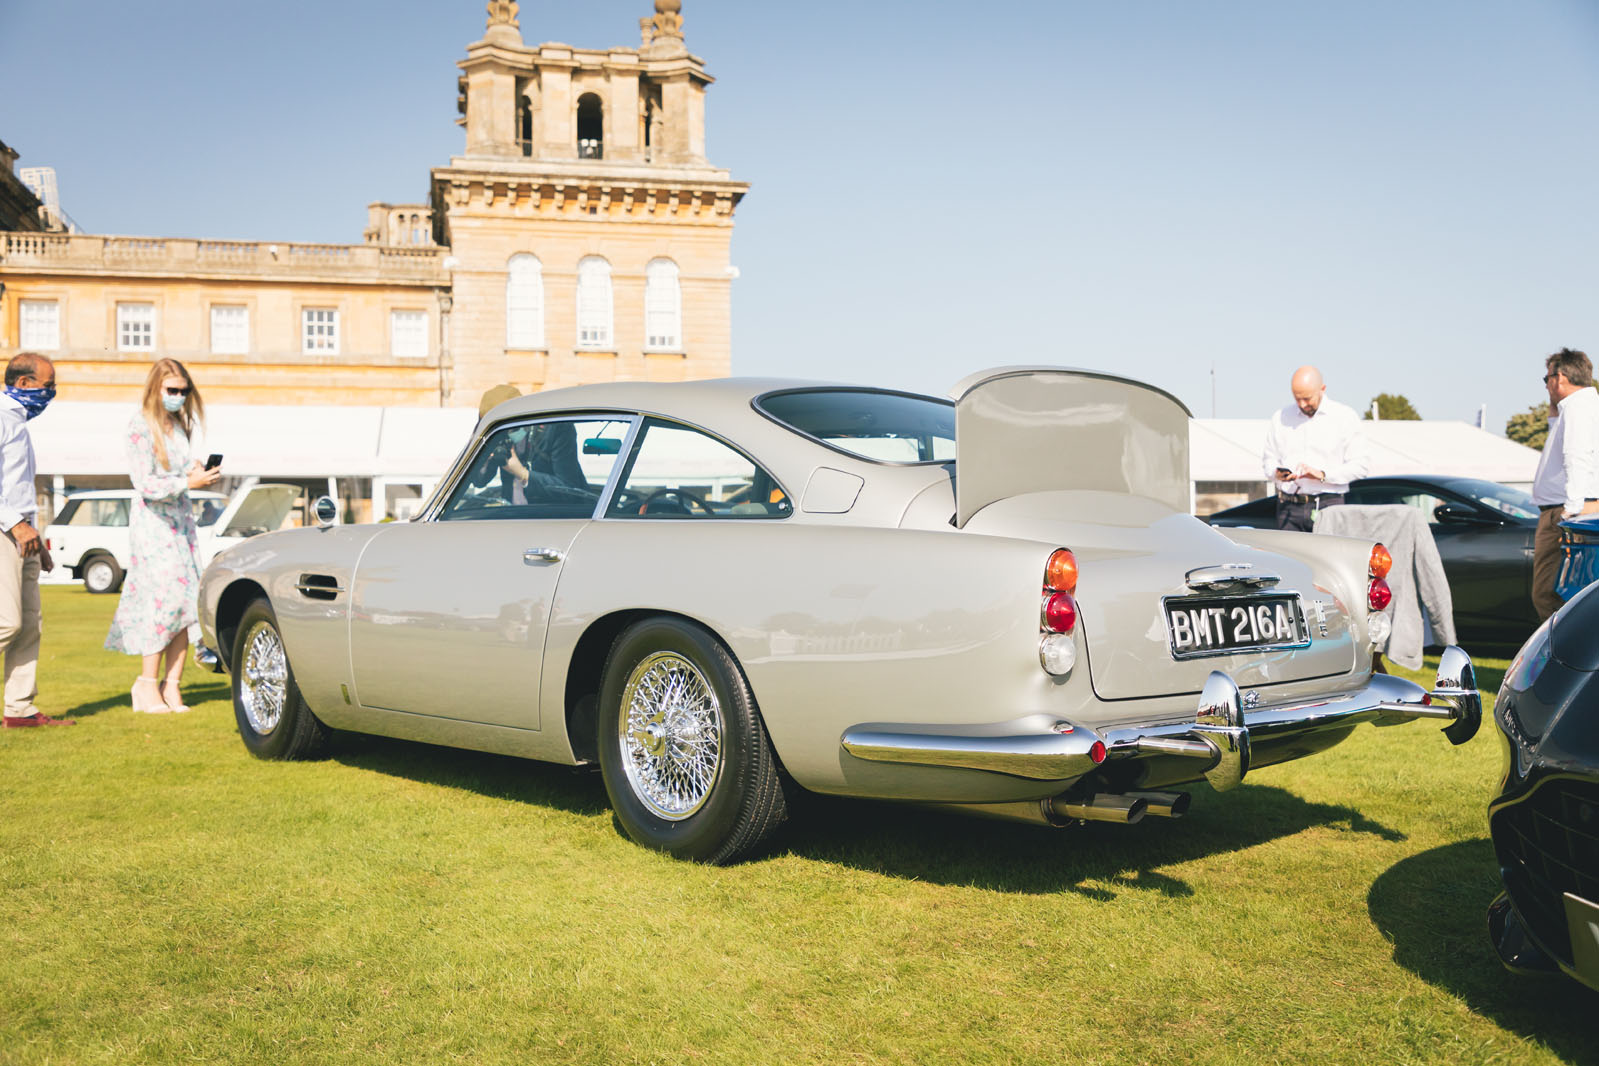 James Bond's Original Aston Martin DB5 From Goldfinger Allegedly Found  After Almost 25 Years